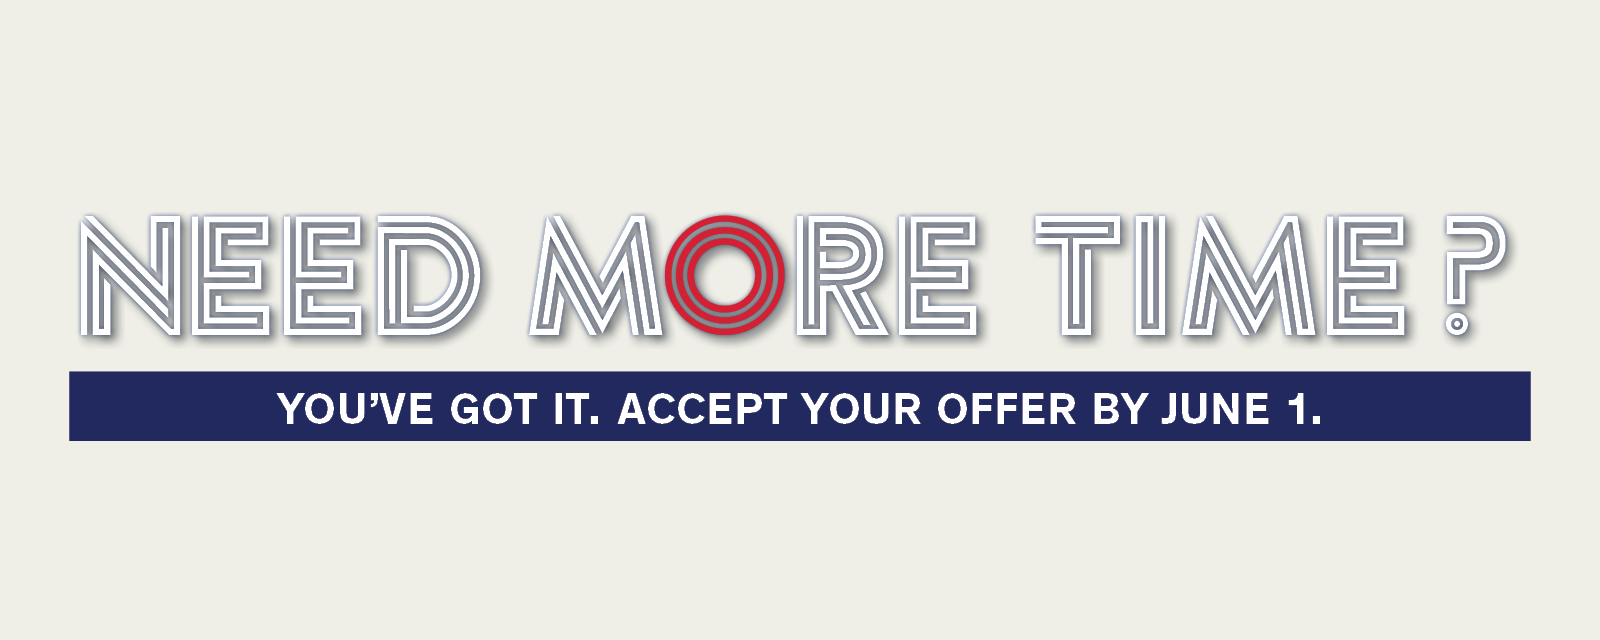 tan image with white text that reads "need more time? you've got it. accept your offer by June 1."